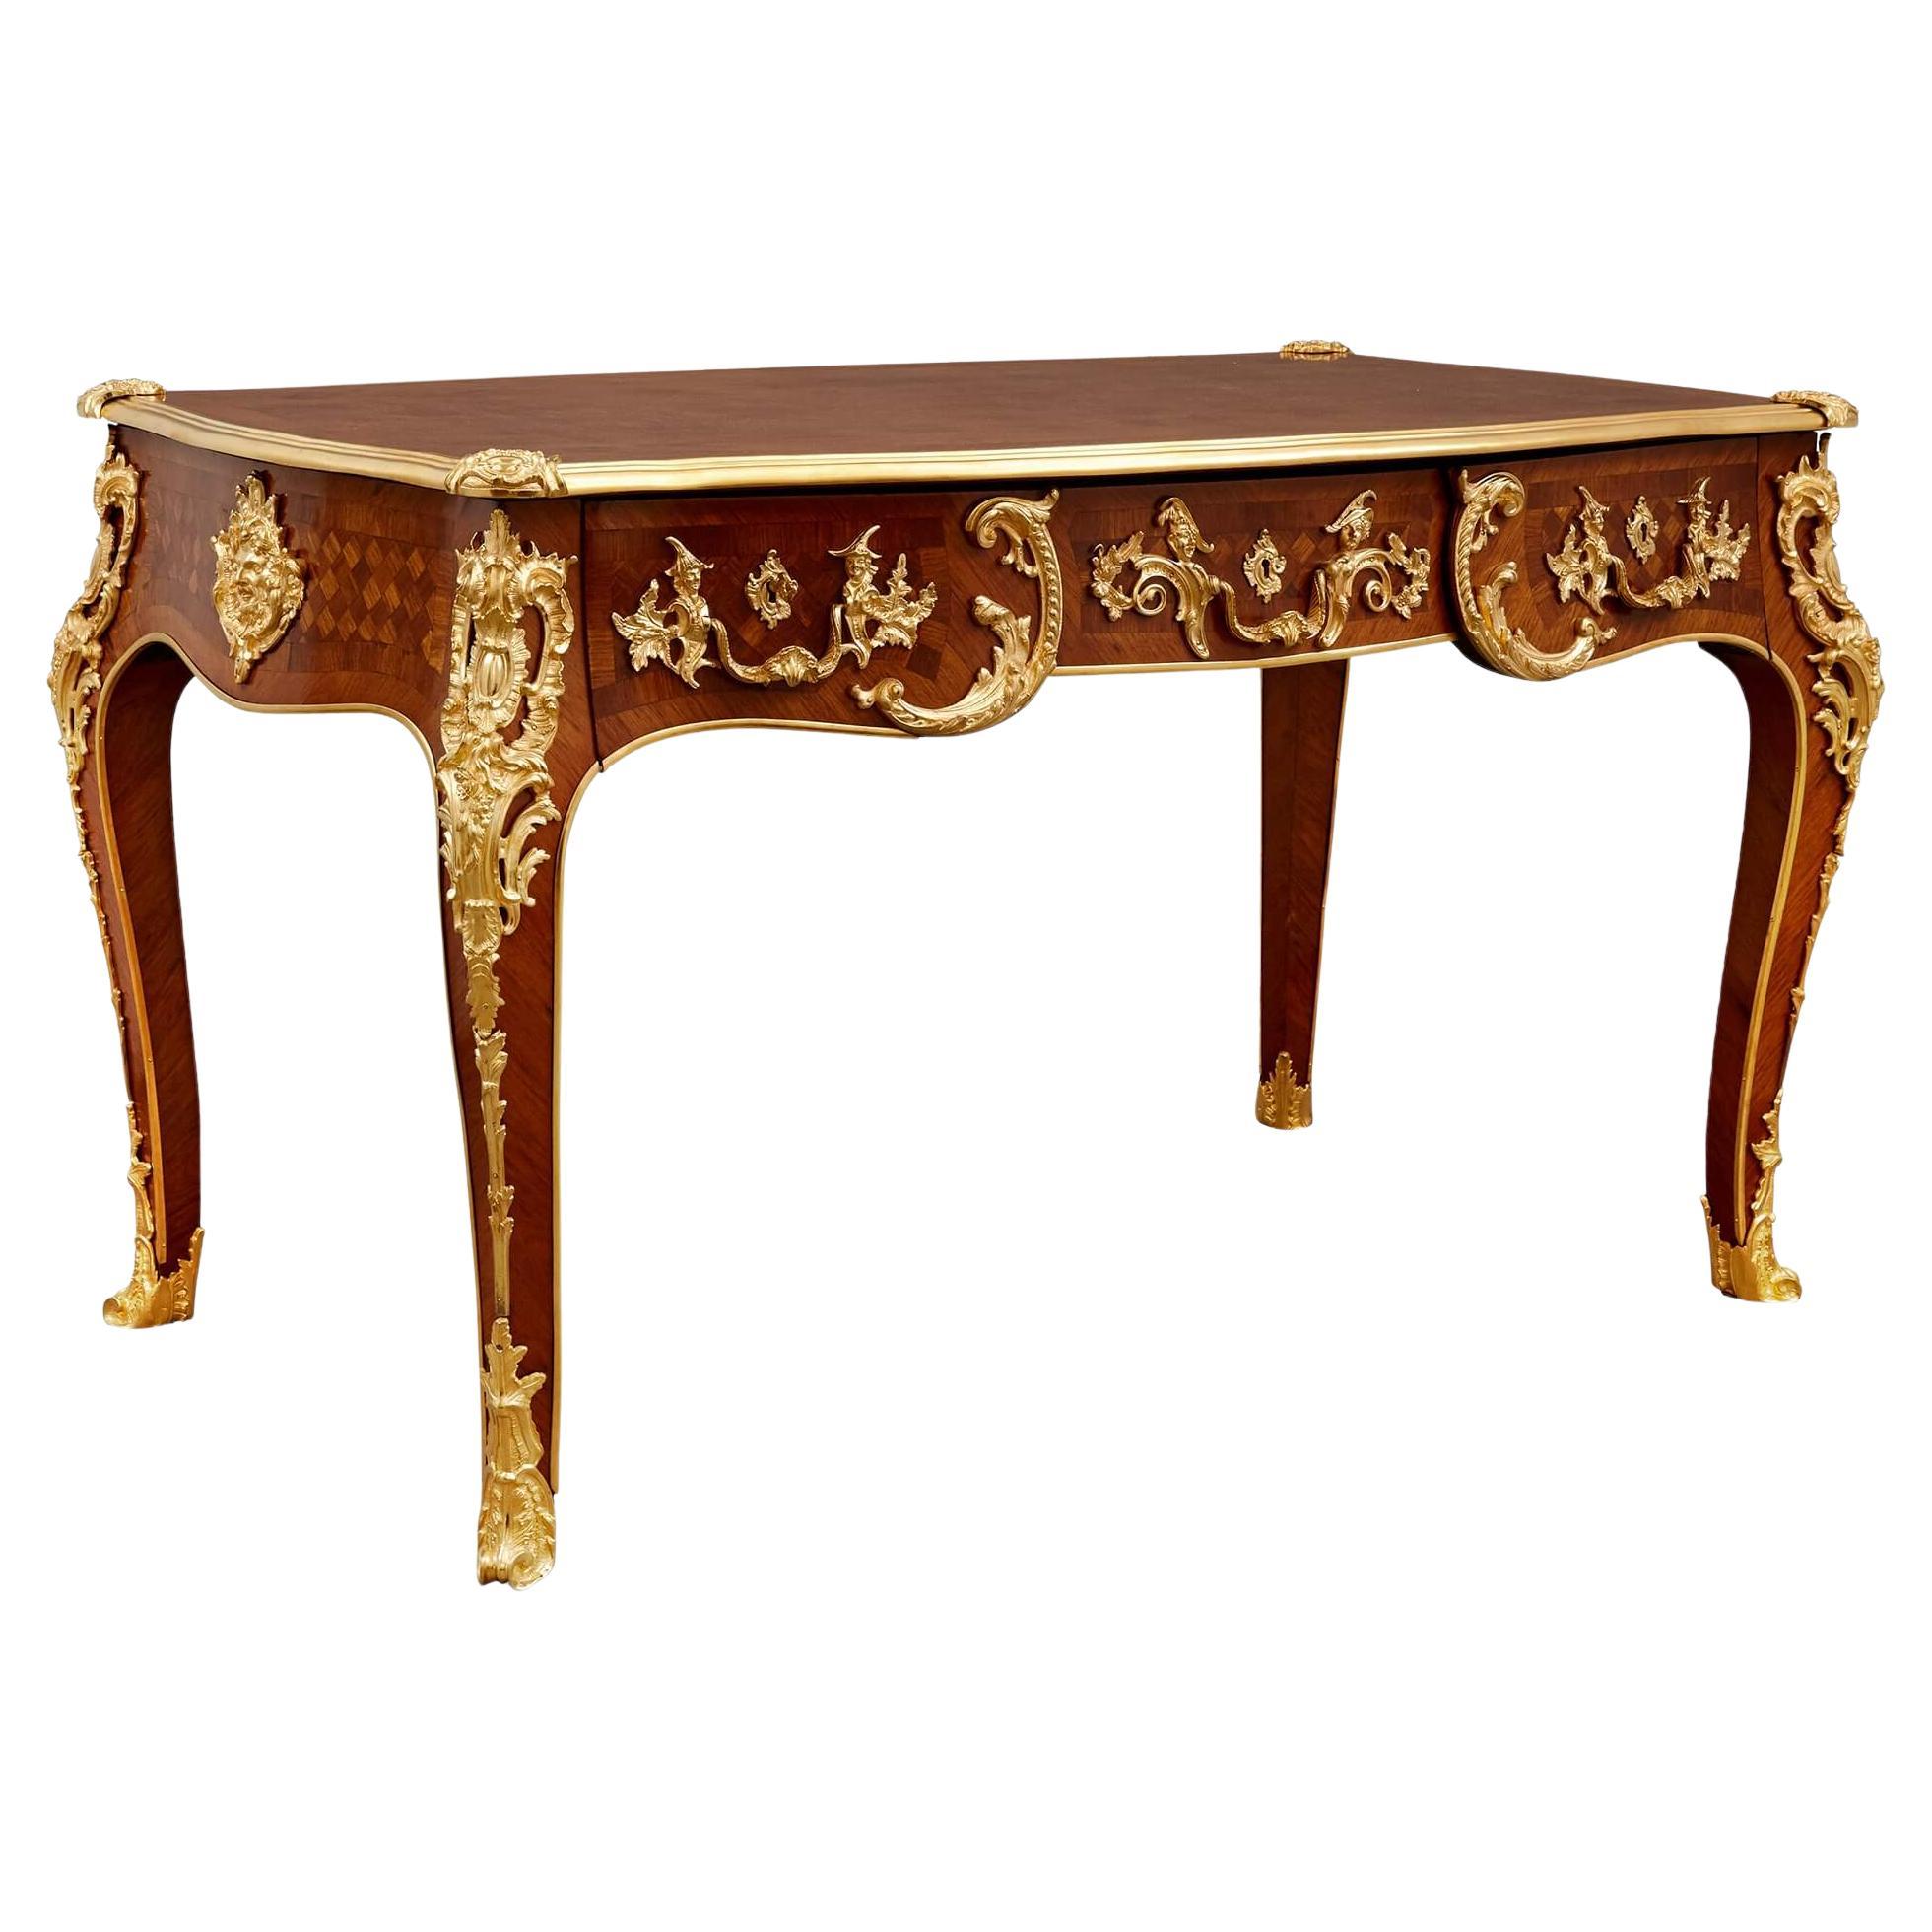 French Gilt Bronze and Marquetry Writing Desk After Cressent